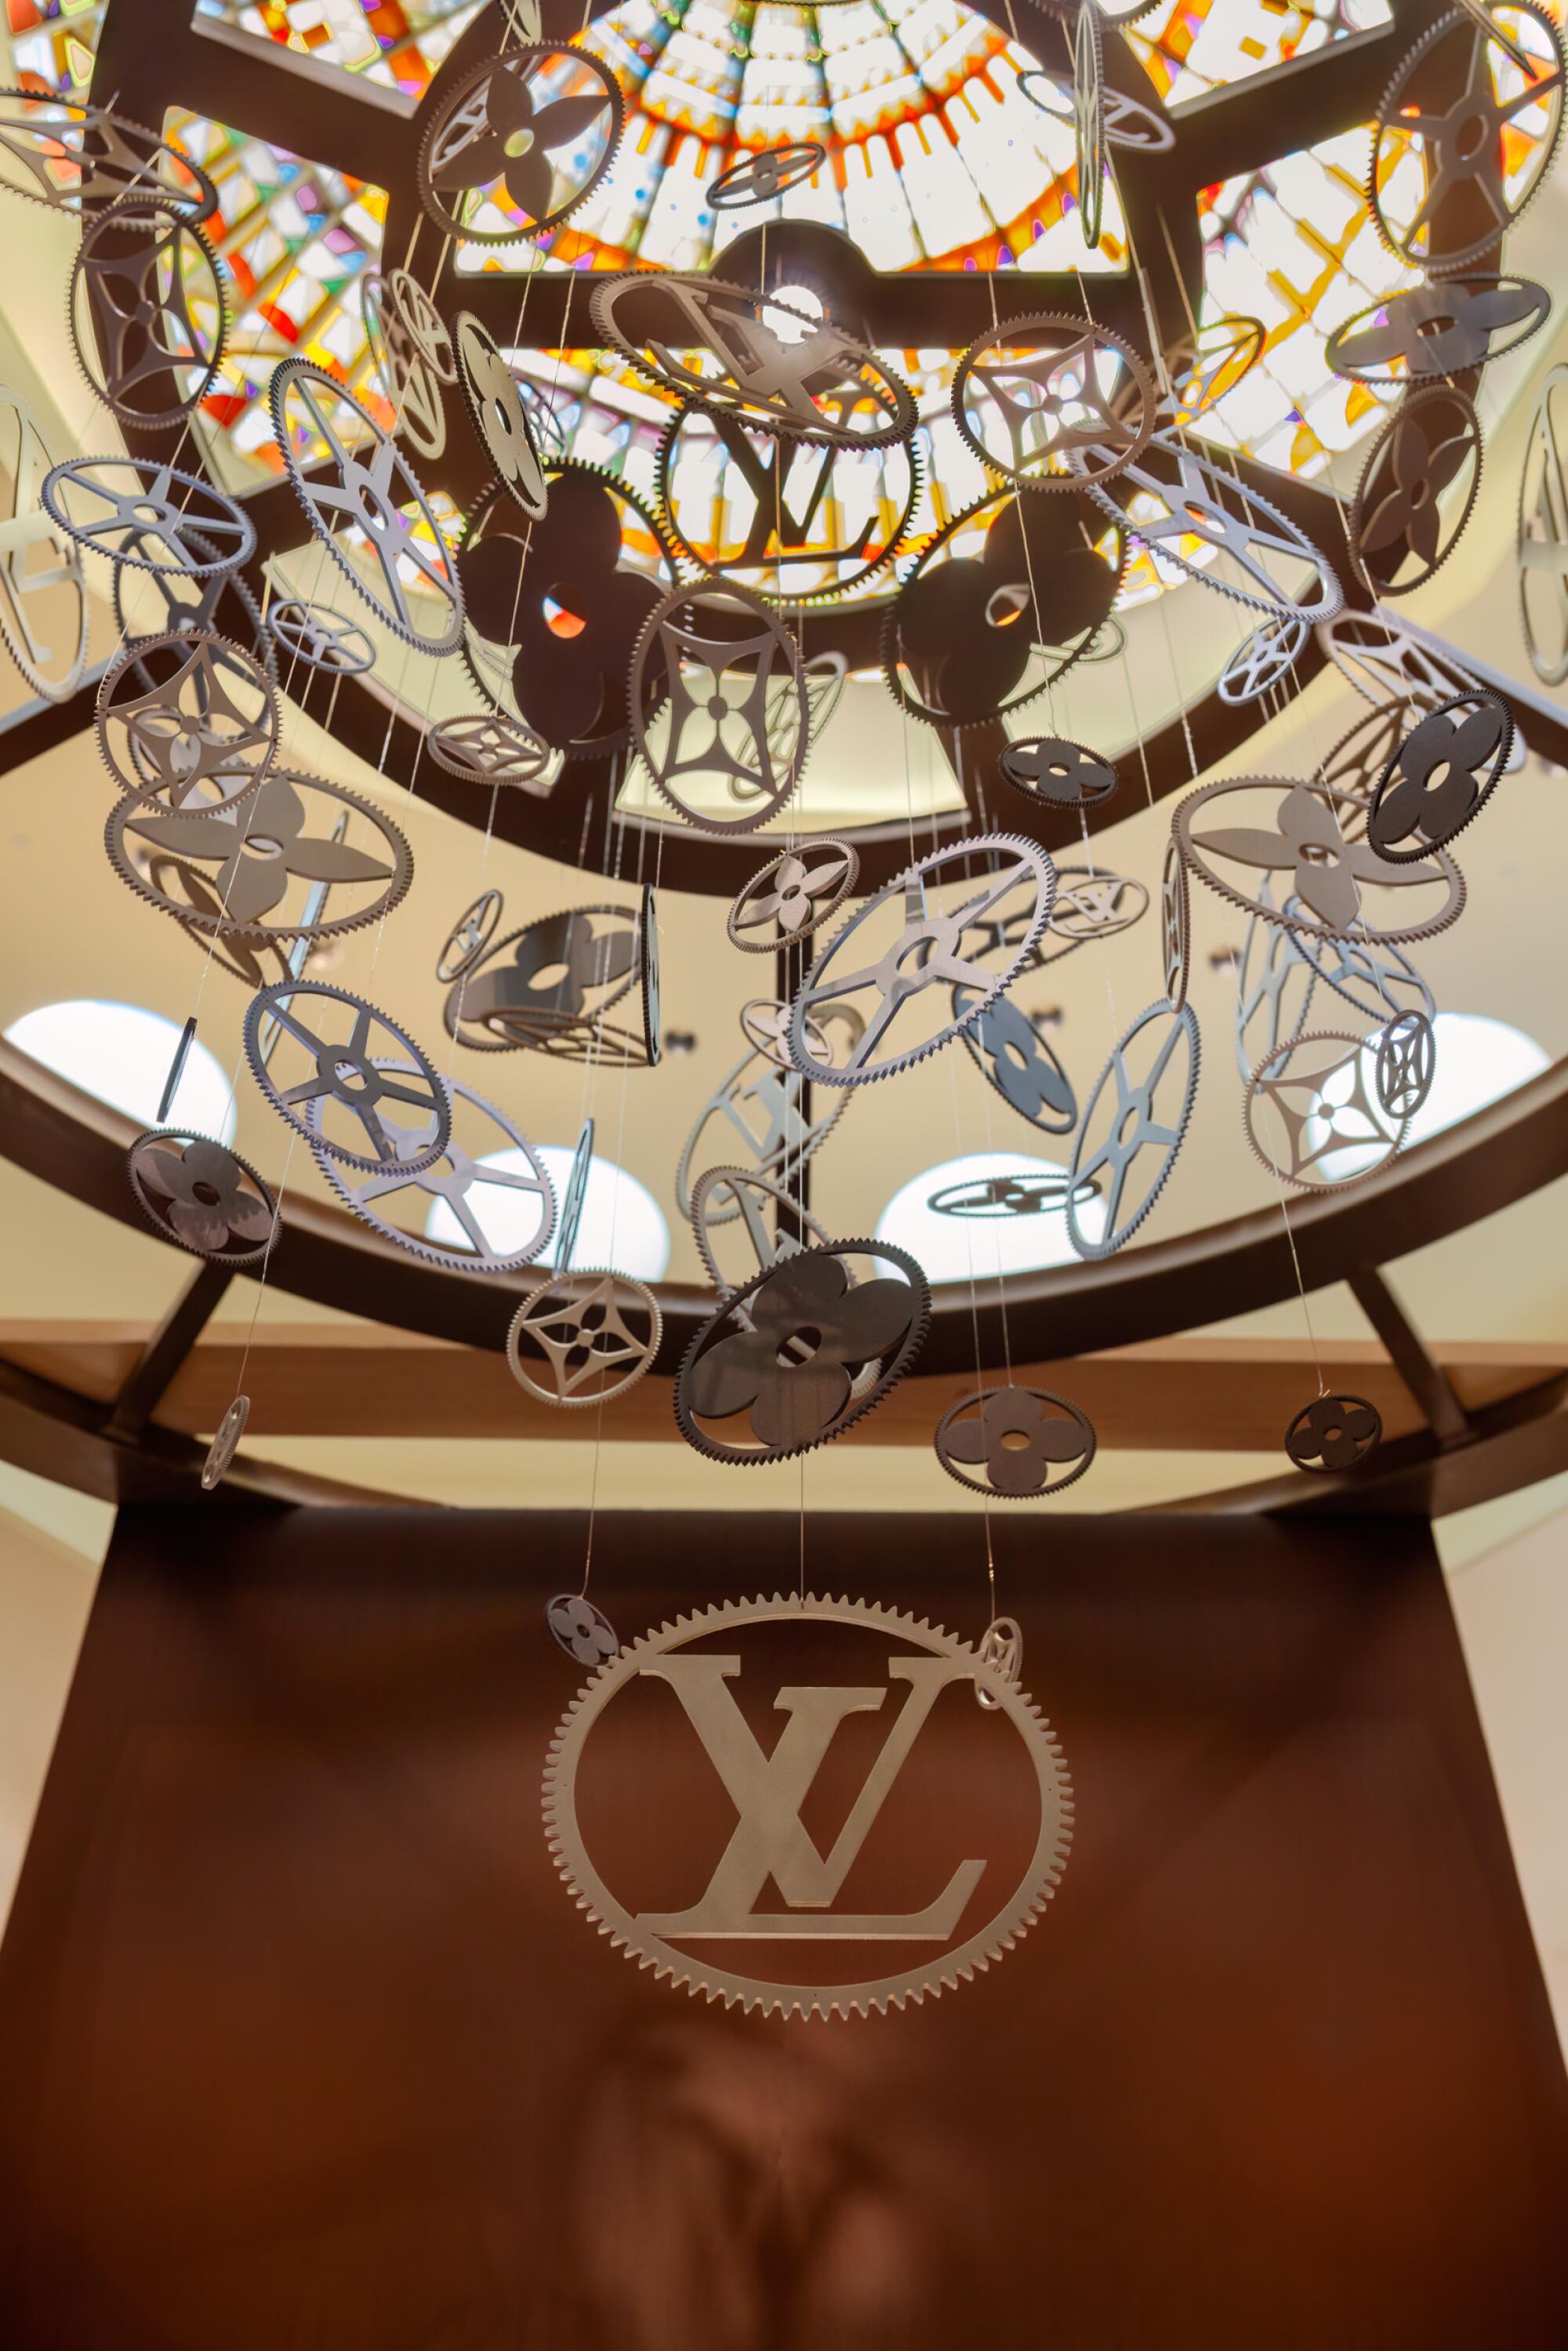 A group of metal, patterned discs hanging from a dome ceiling above a larger metal cutout of the Louis Vuitton logo